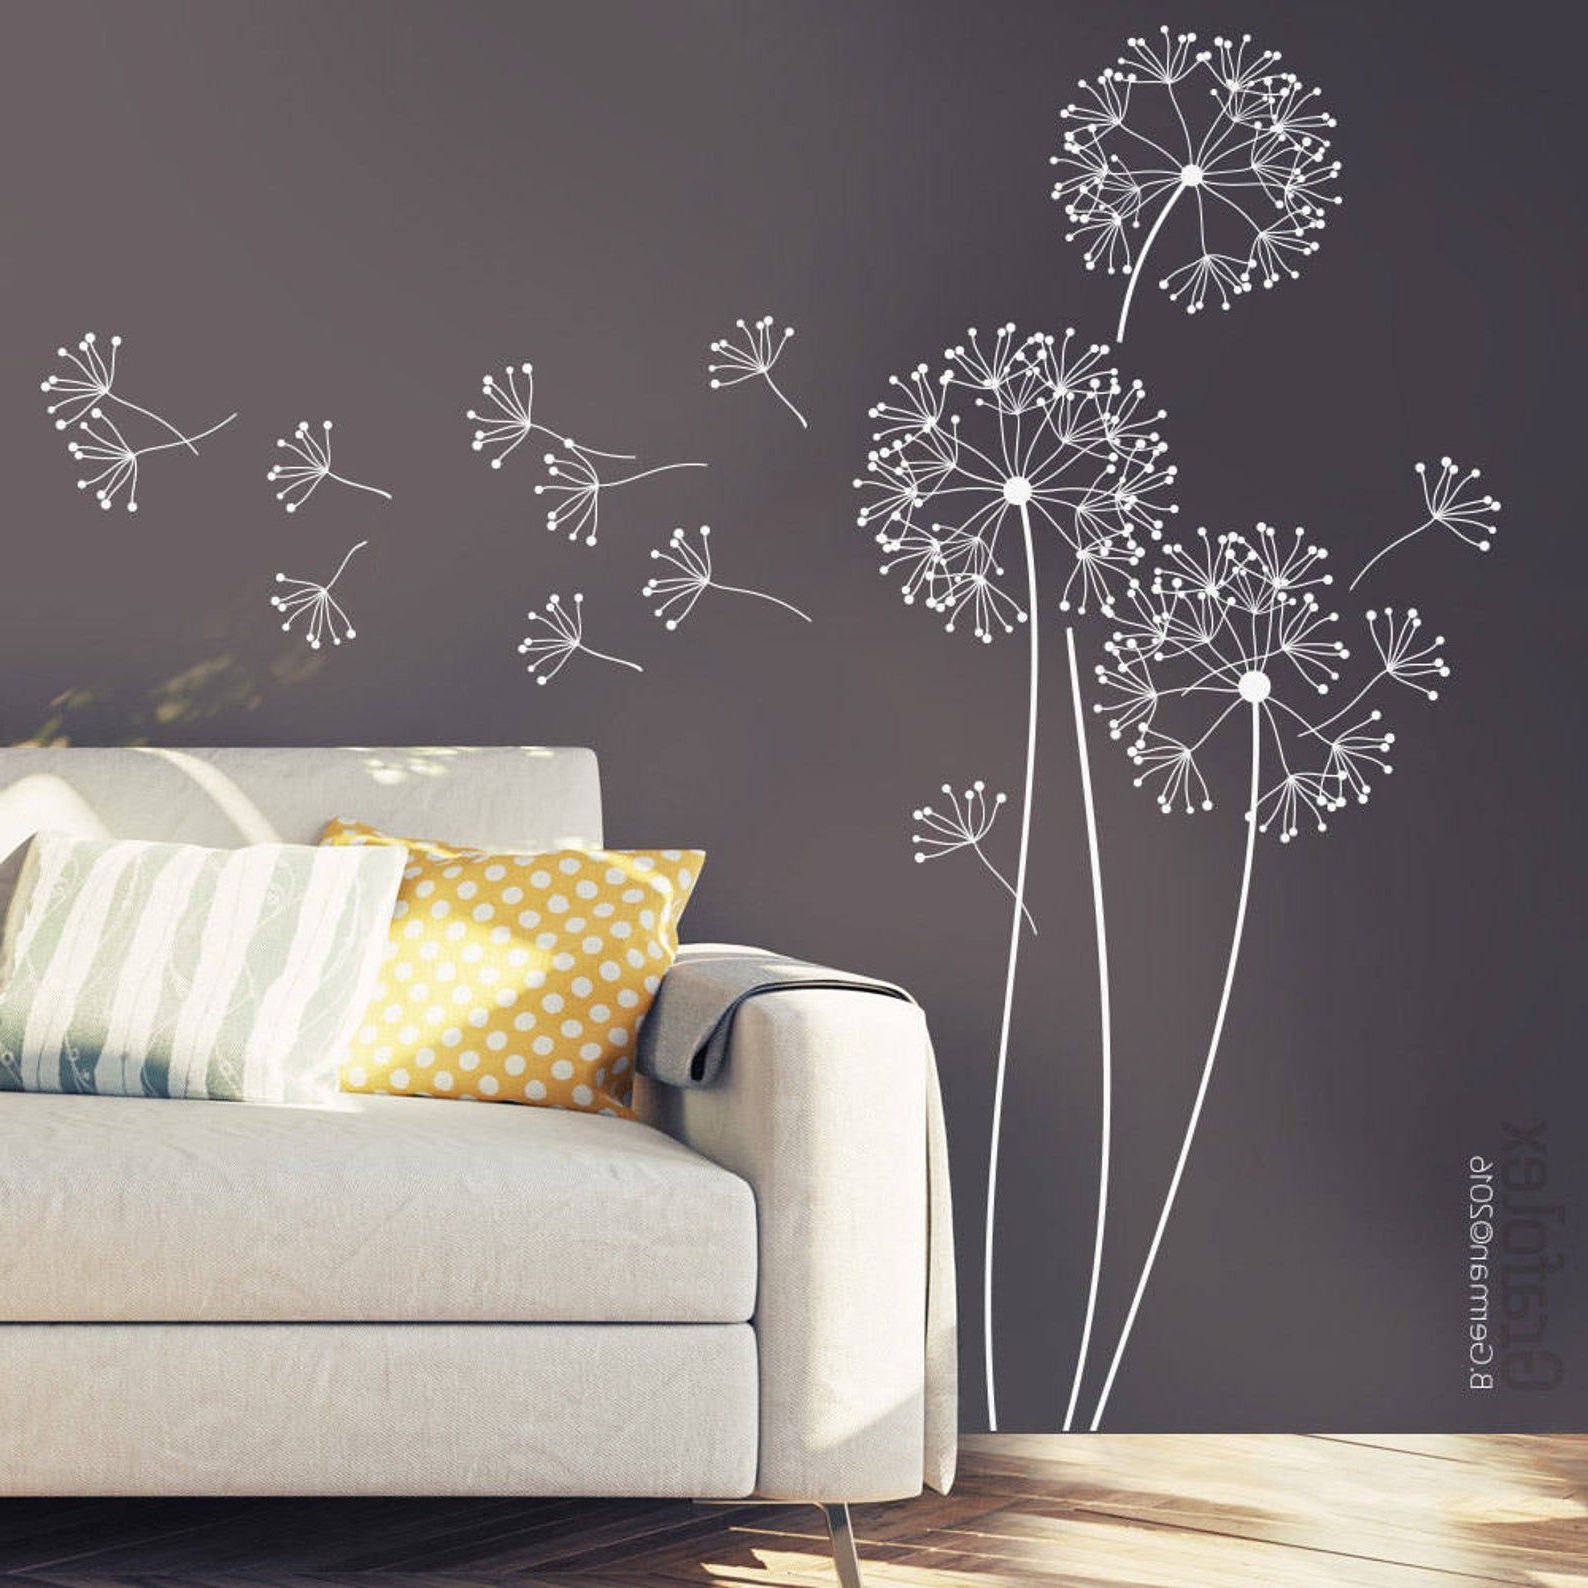 Latest Flying Dandelion Wall Art Pertaining To Wall Decal Dandelion With Flying Seeds 151 Cm High Dandelion – Etsy (View 7 of 15)